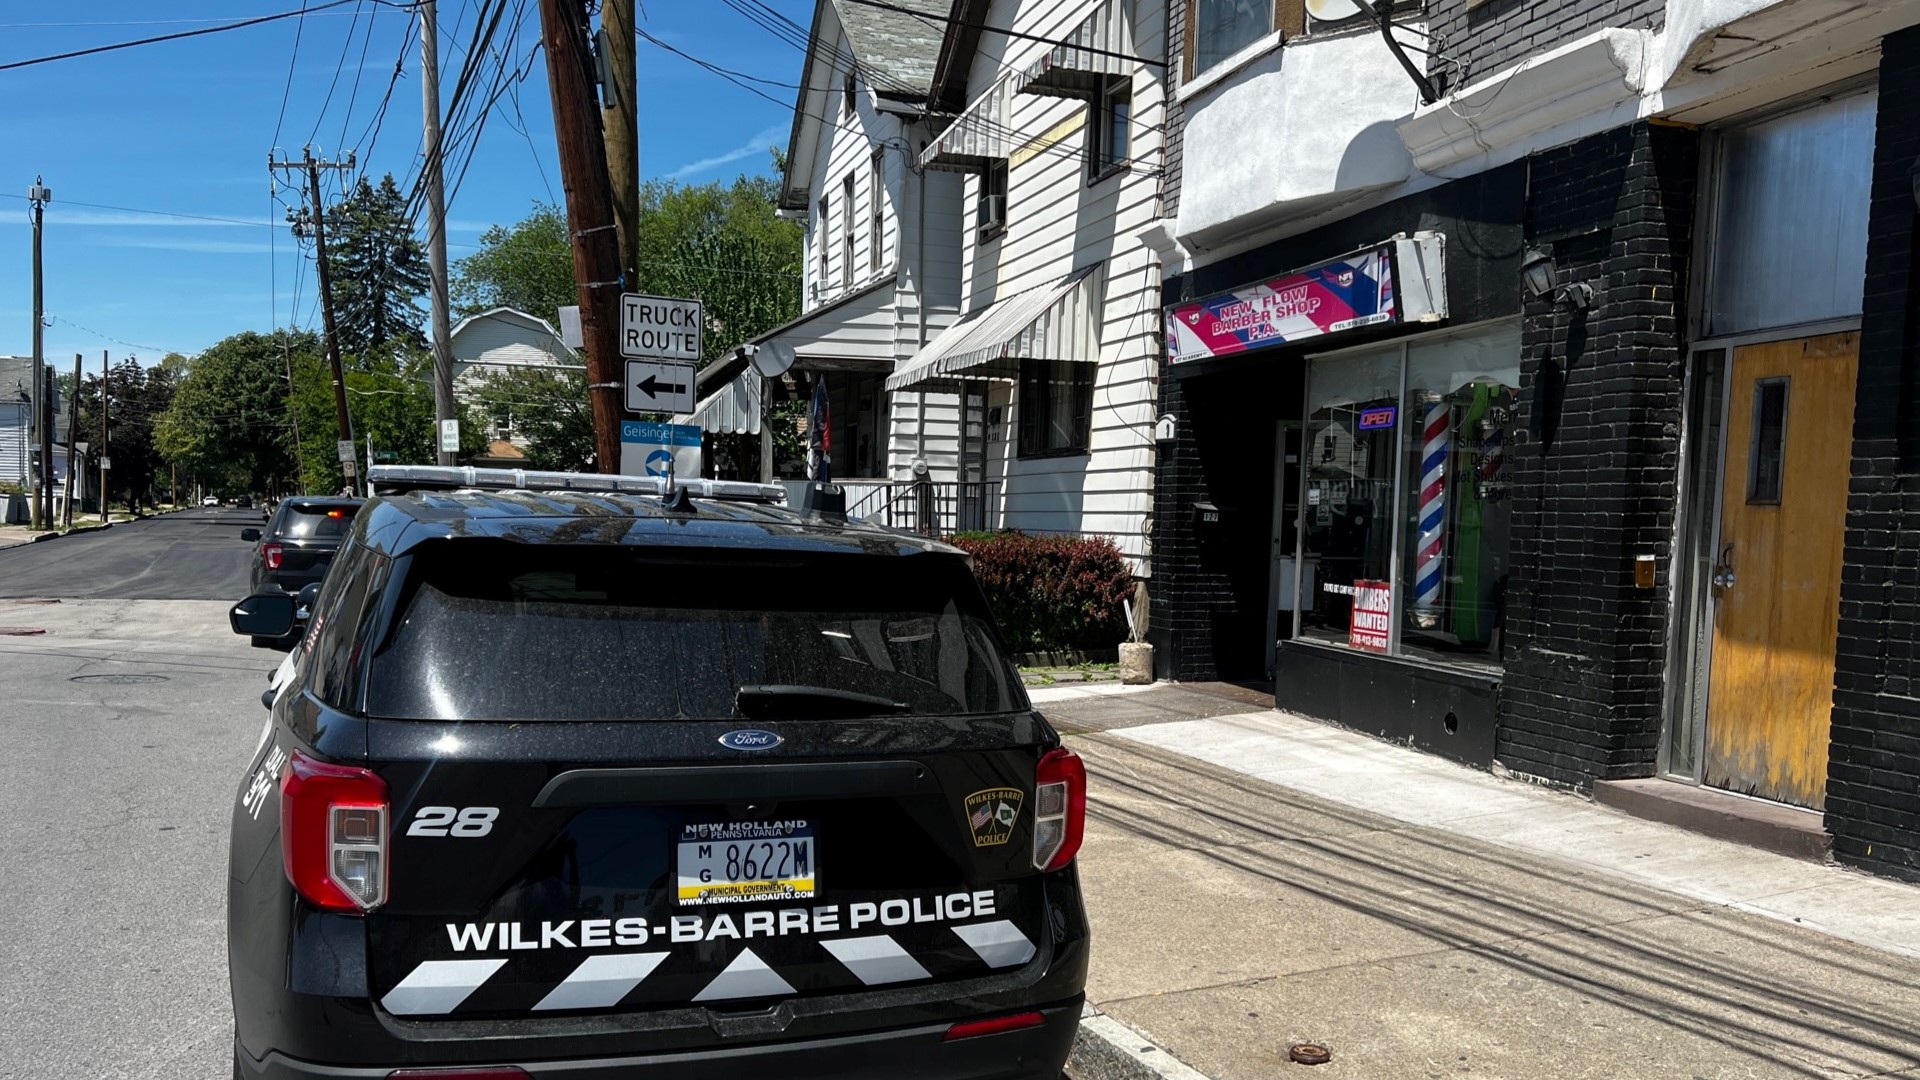 Police say a man was shot inside a barbershop on Wednesday.